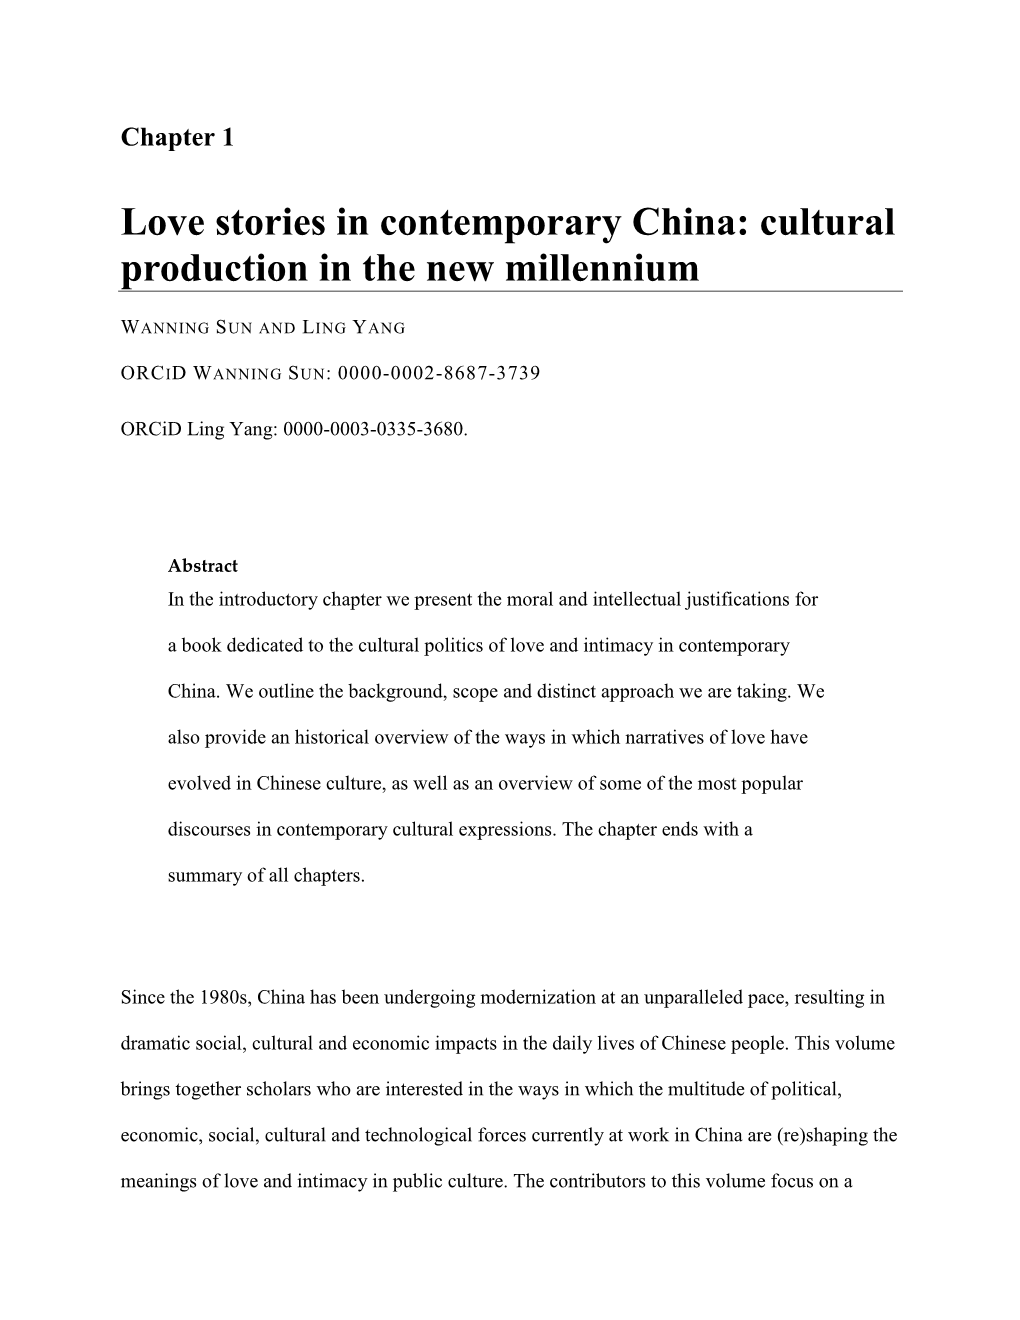 Love Stories in Contemporary China: Cultural Production in the New Millennium